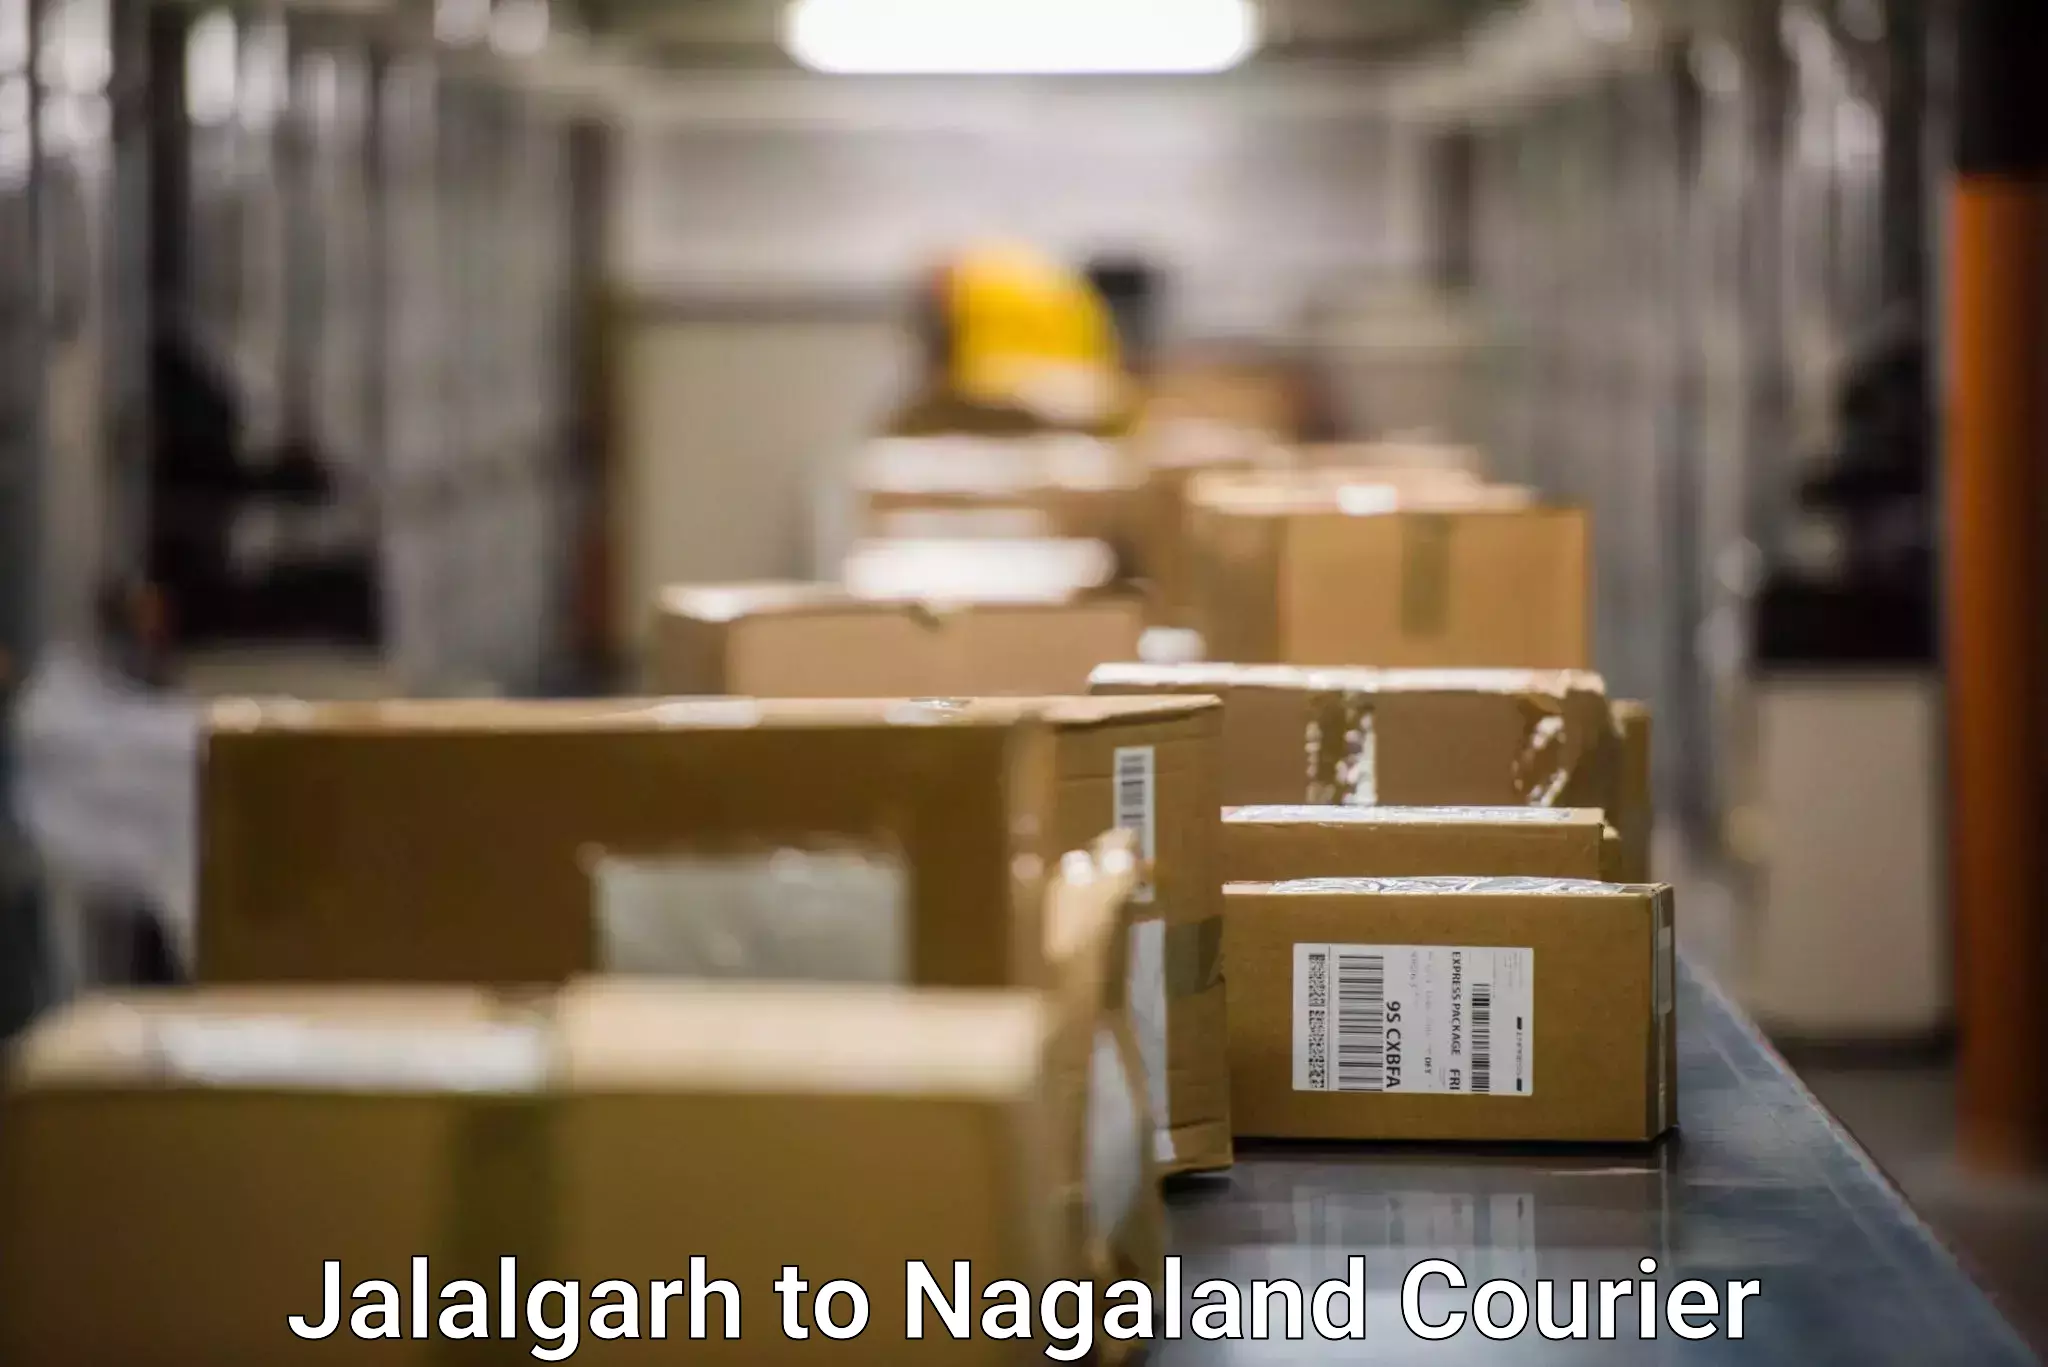 On-call courier service Jalalgarh to Nagaland